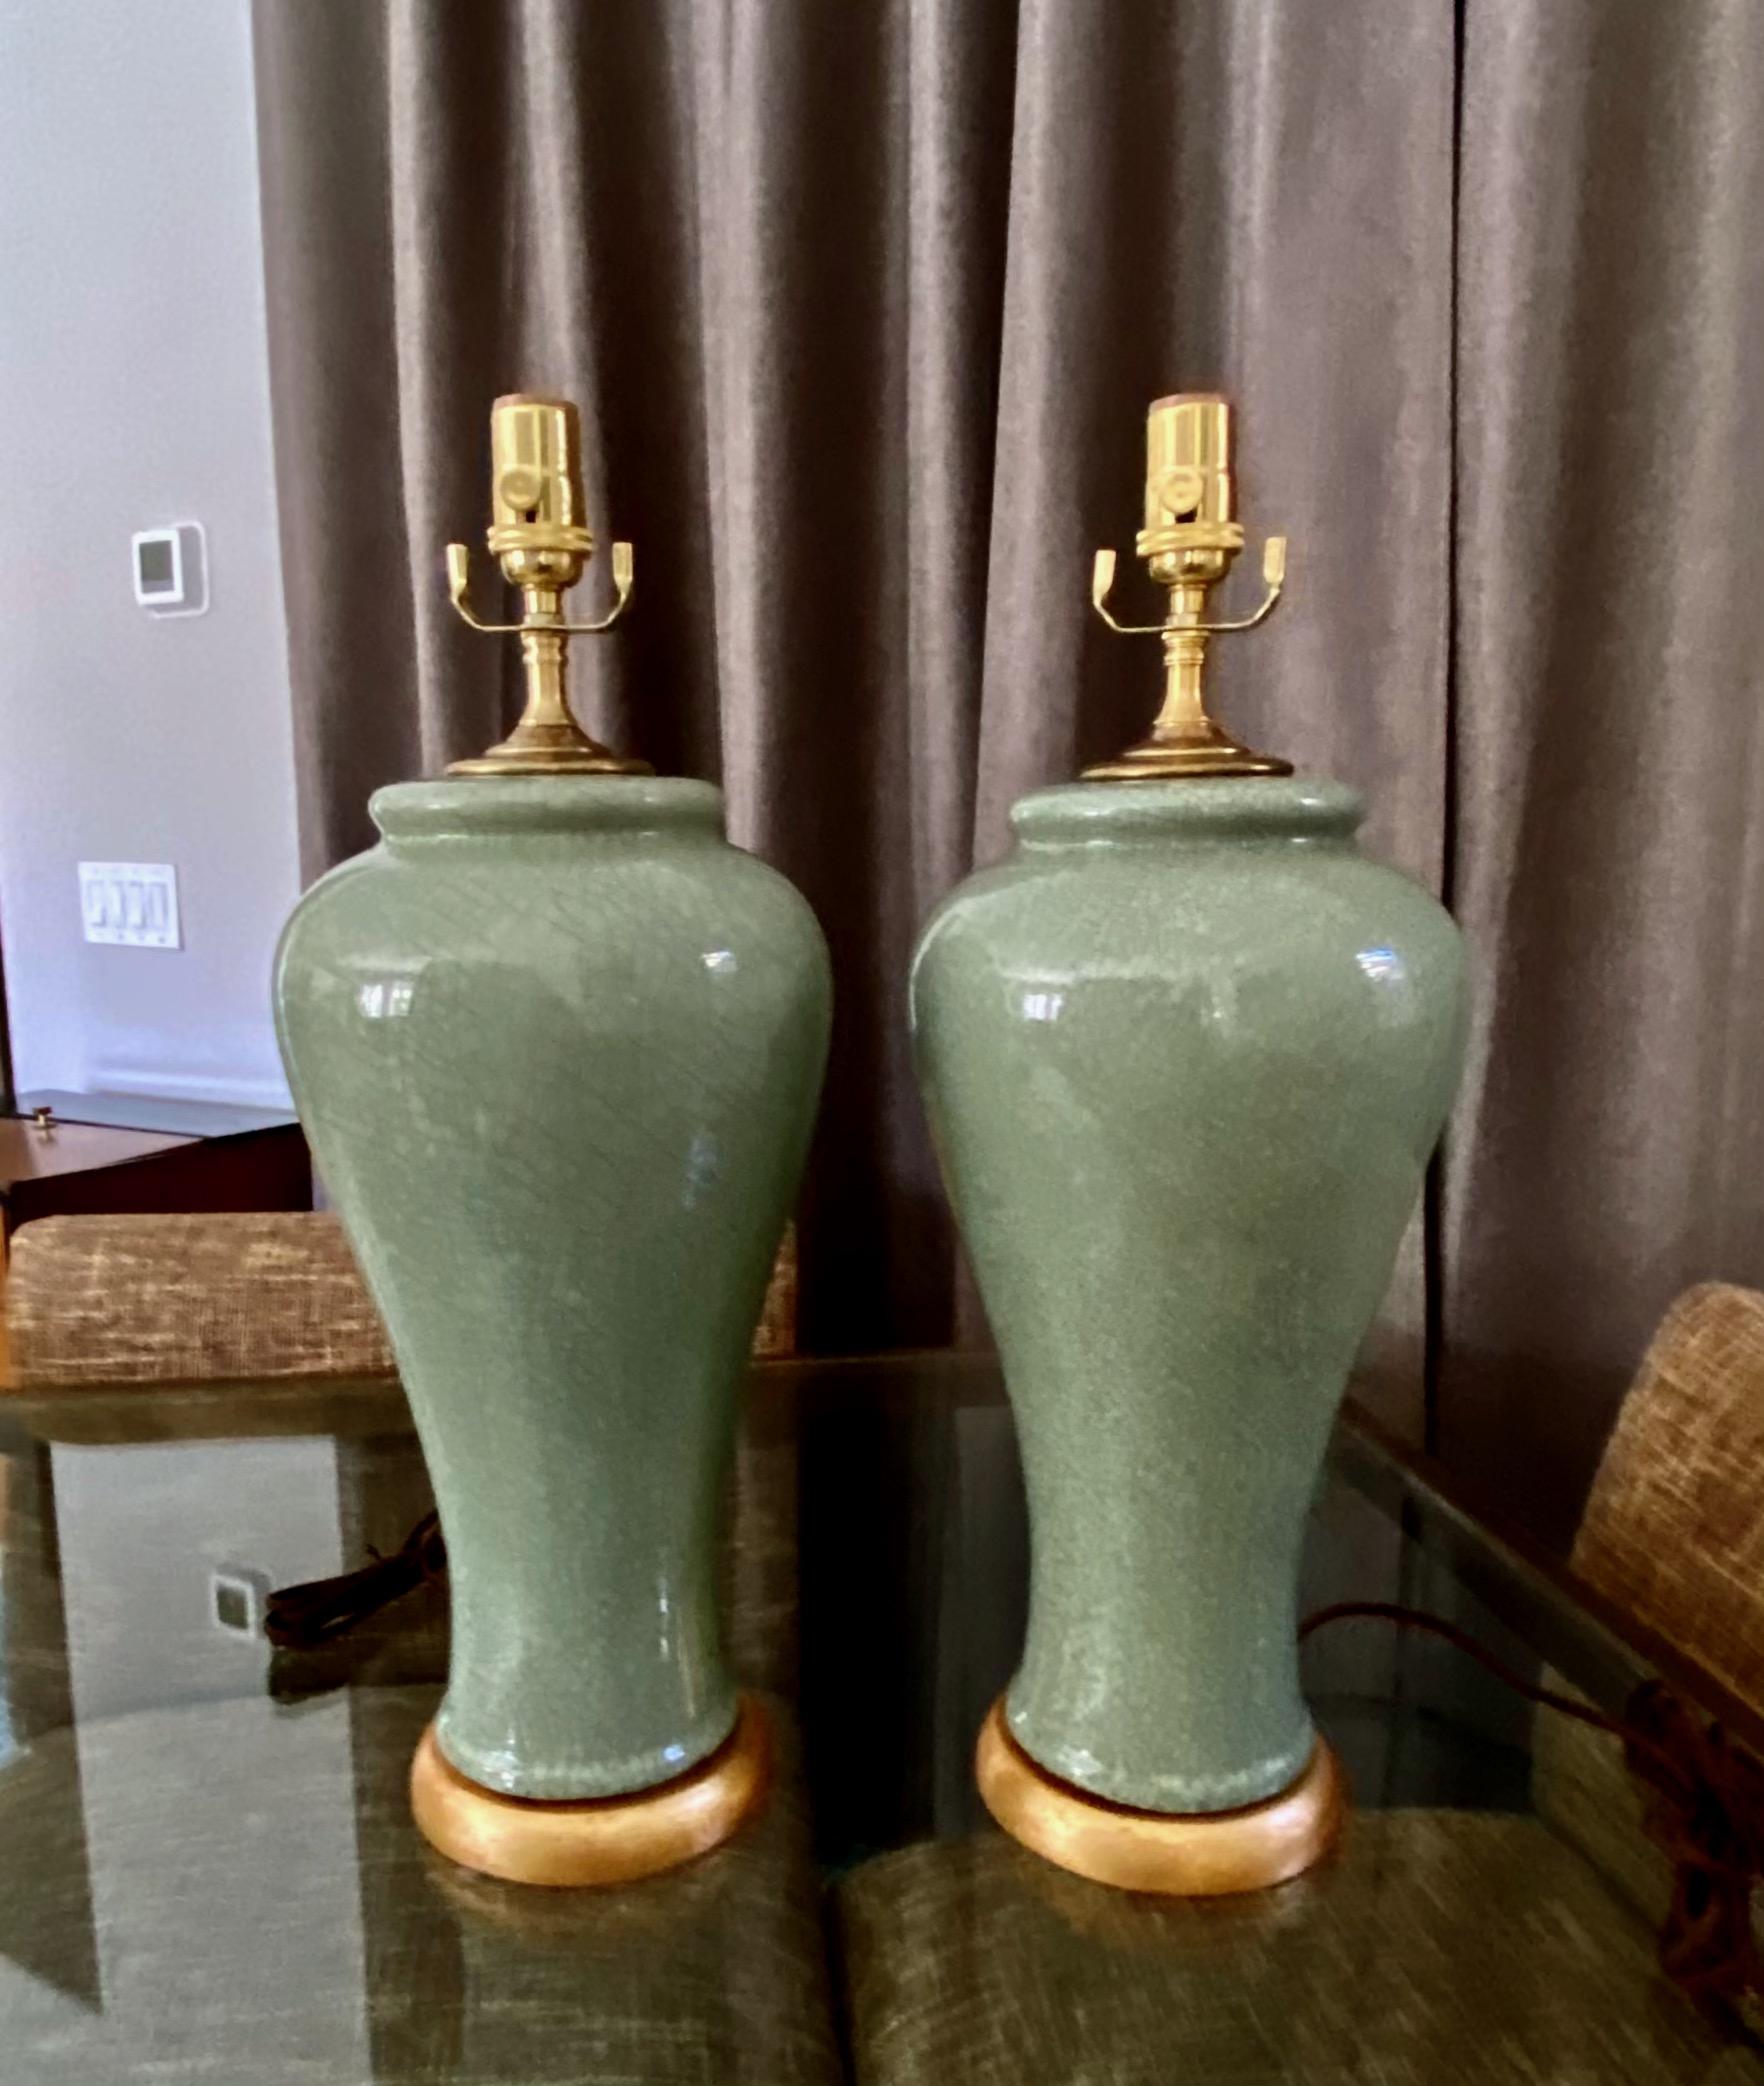 Pair of Chinese celadon green crackle porcelain baluster form vase table lamp. Mounted on gilt turned wood lamp base. Newly wired with new 3 way socket and fittings. Porcelain vase portion is 16